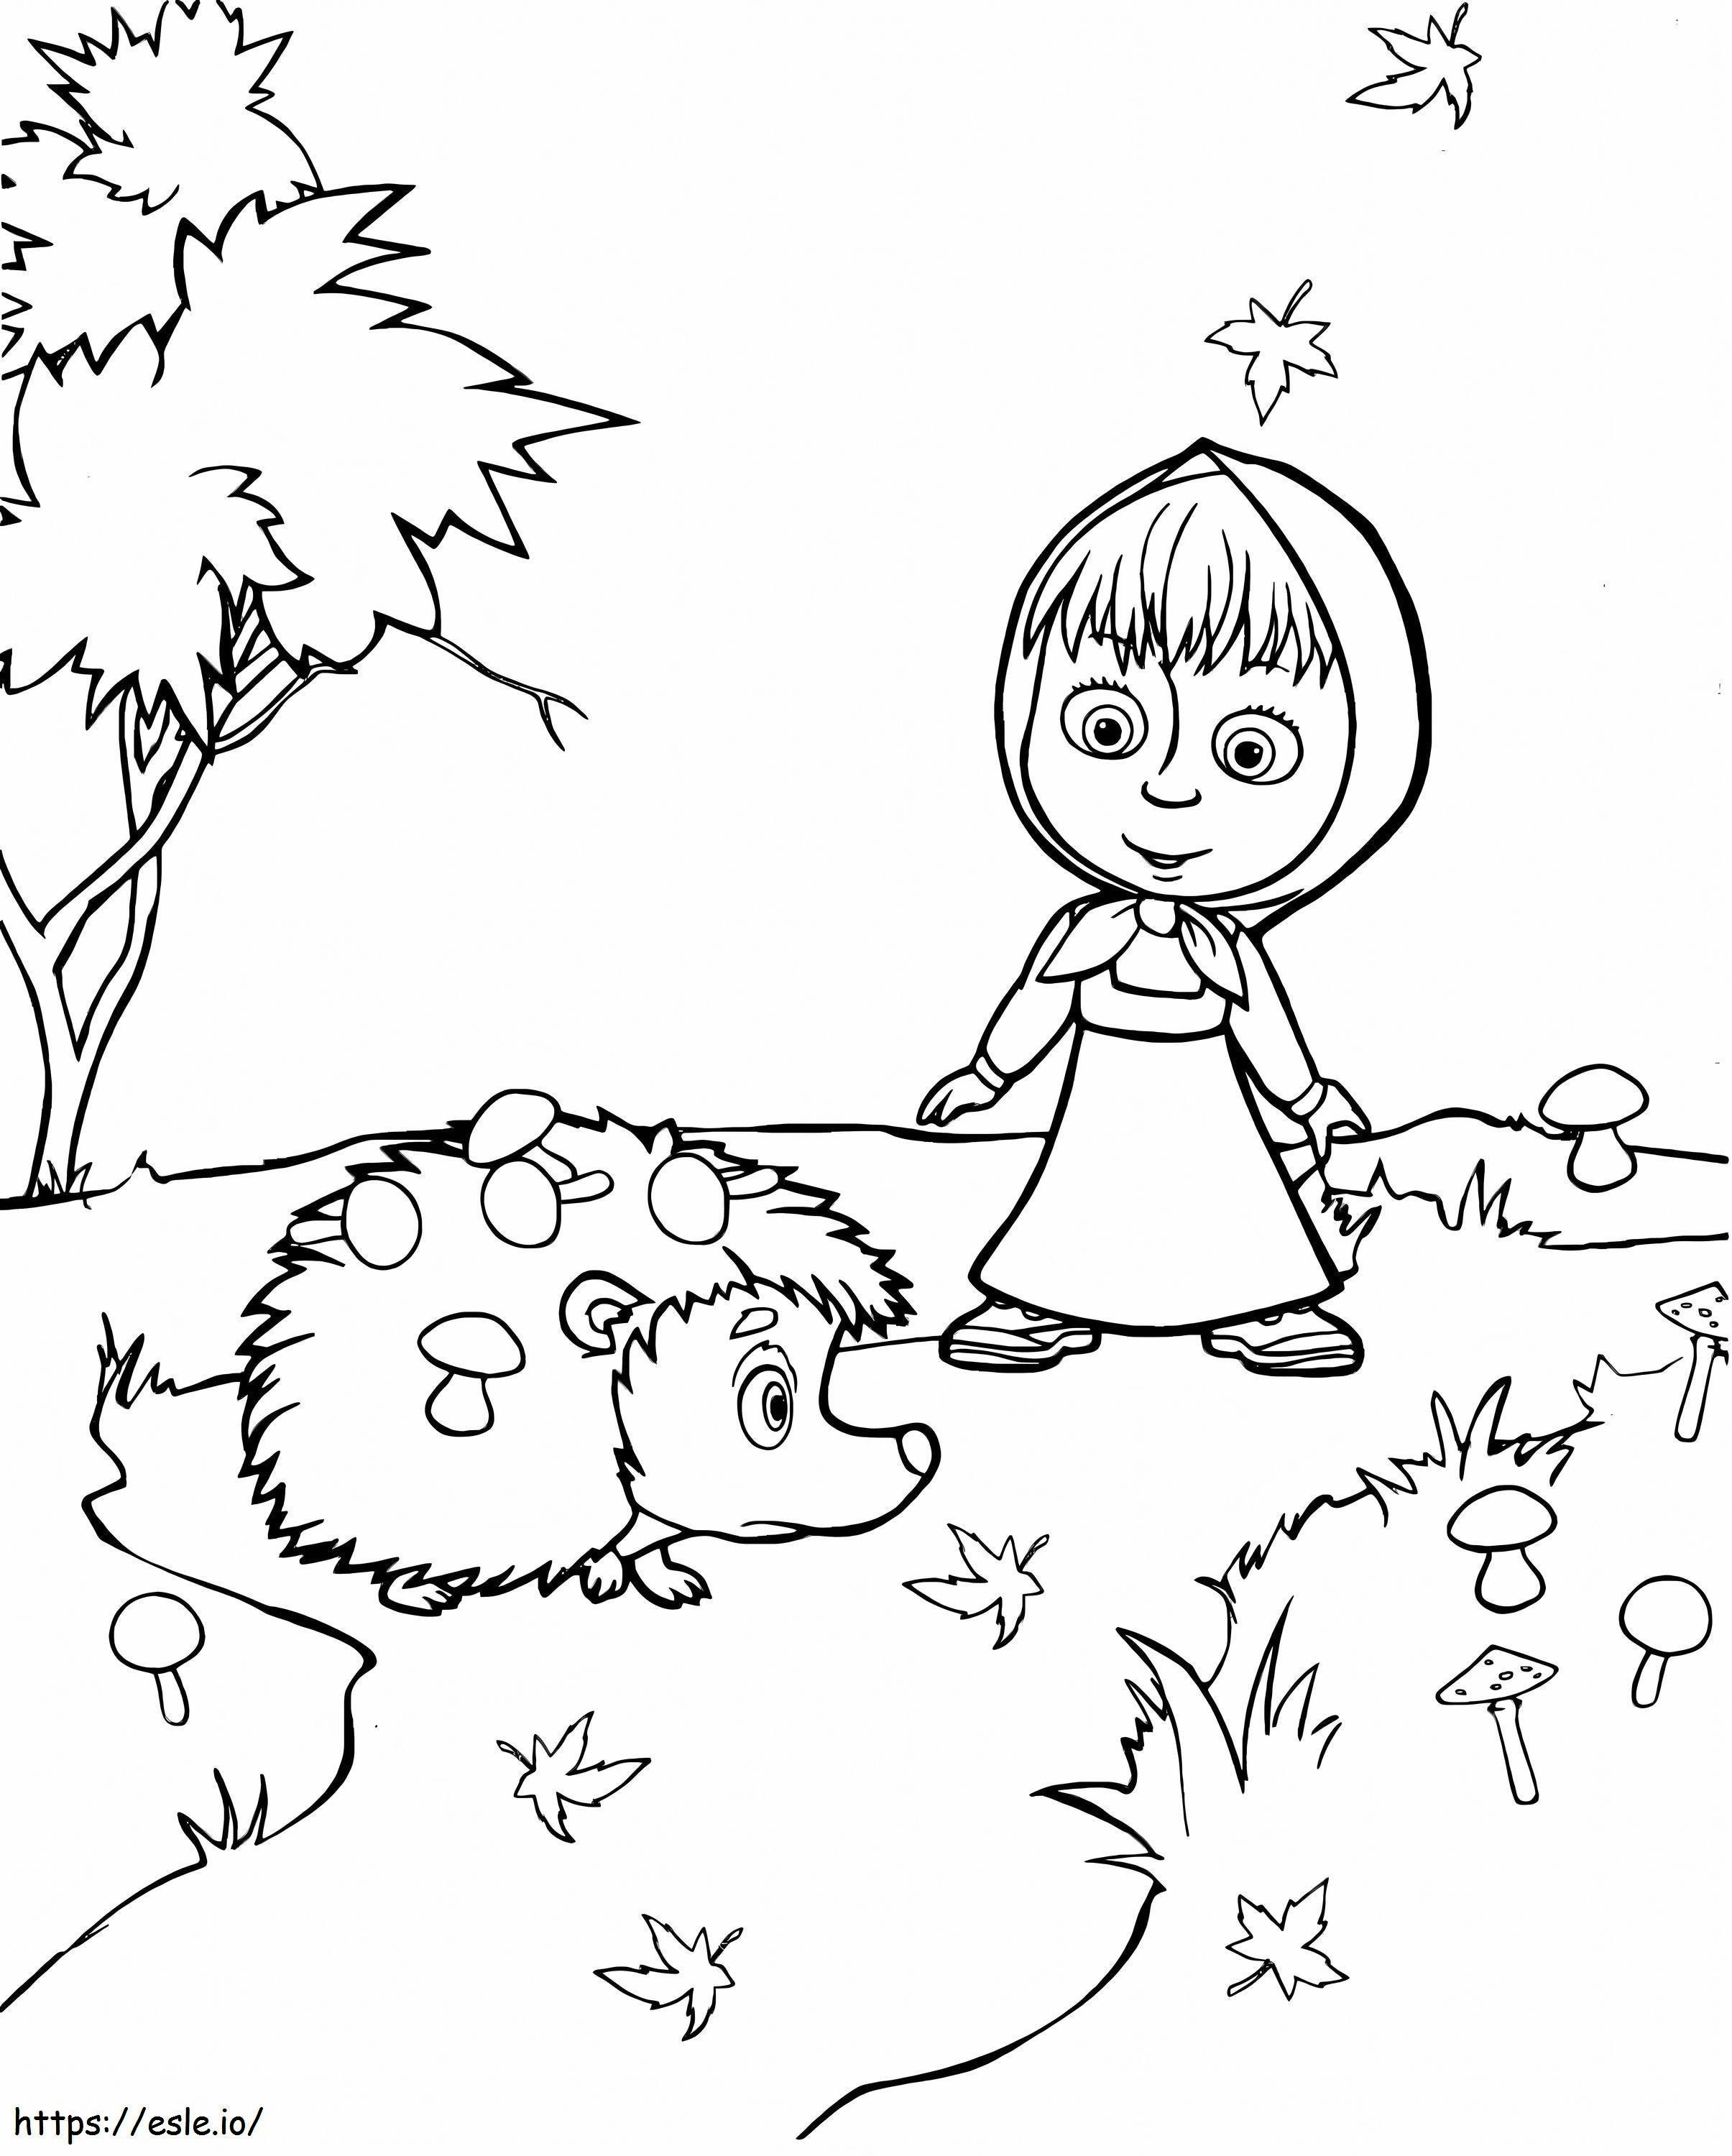 Masha And The Hedgehog coloring page